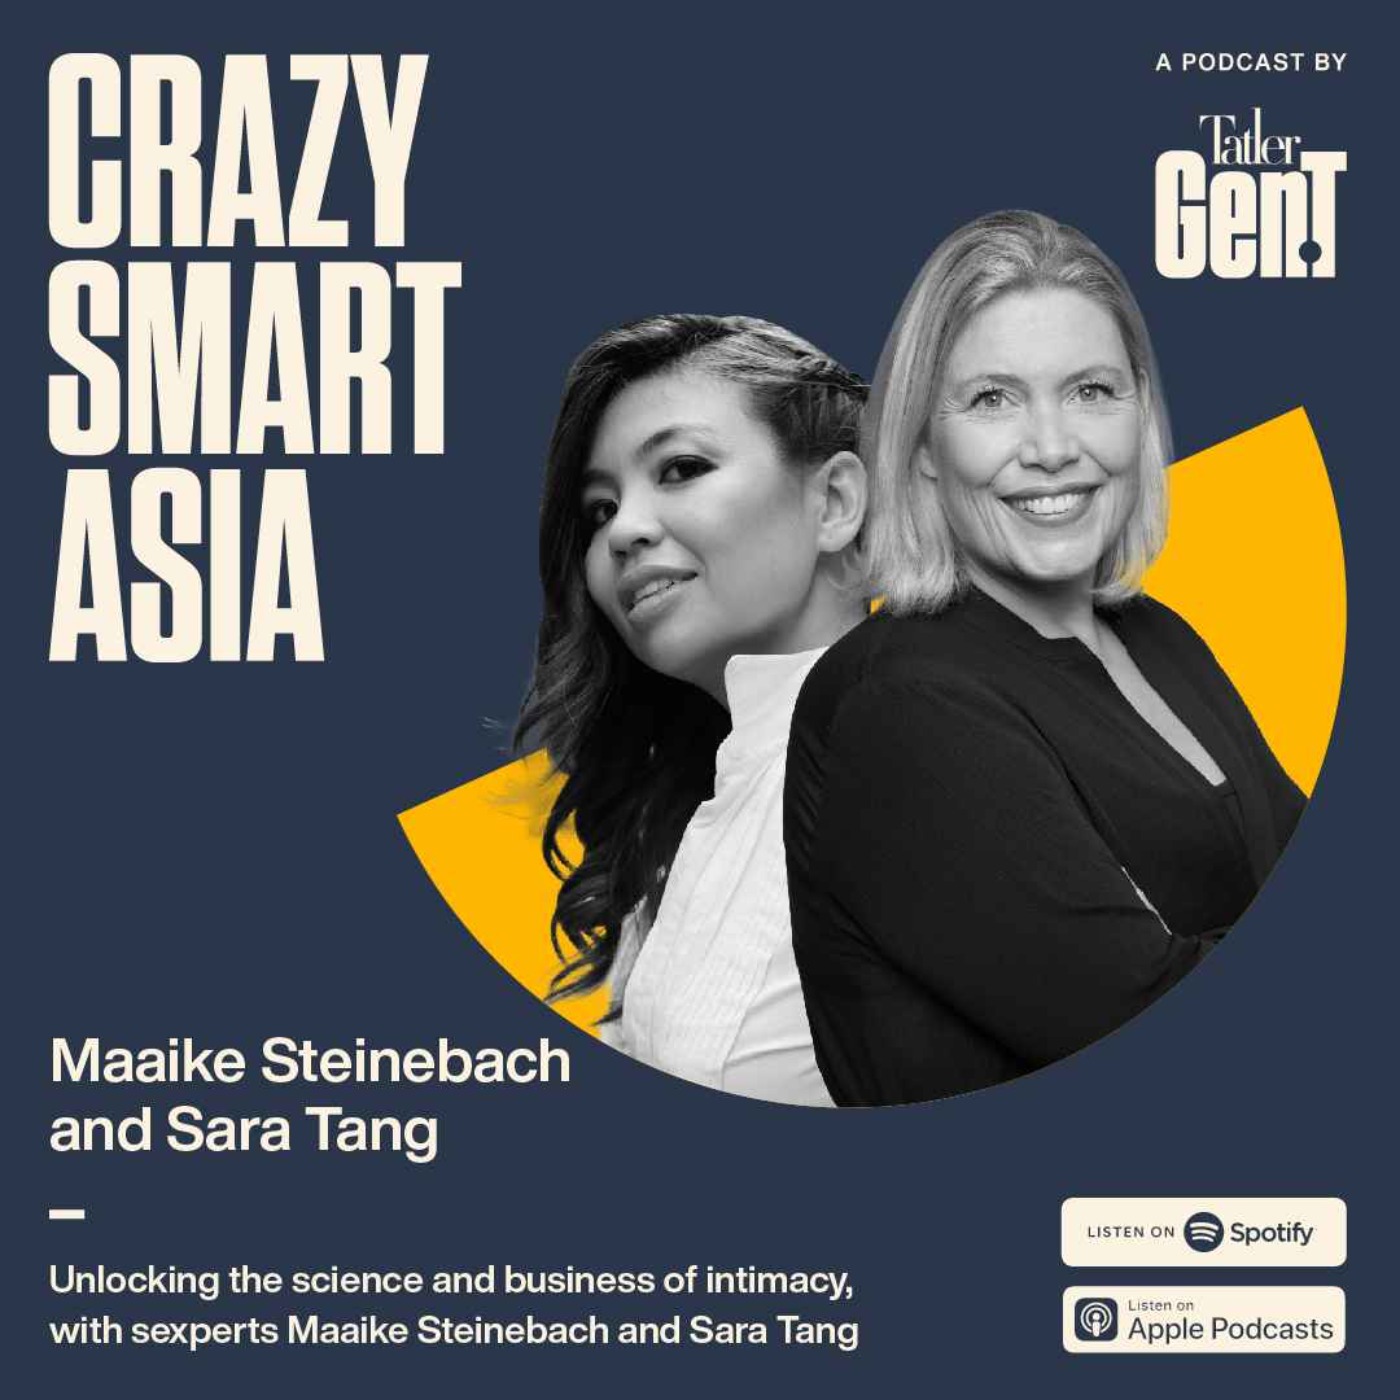 Unlocking the science and business of intimacy, with sexperts Maaike Steinebach and Sara Tang